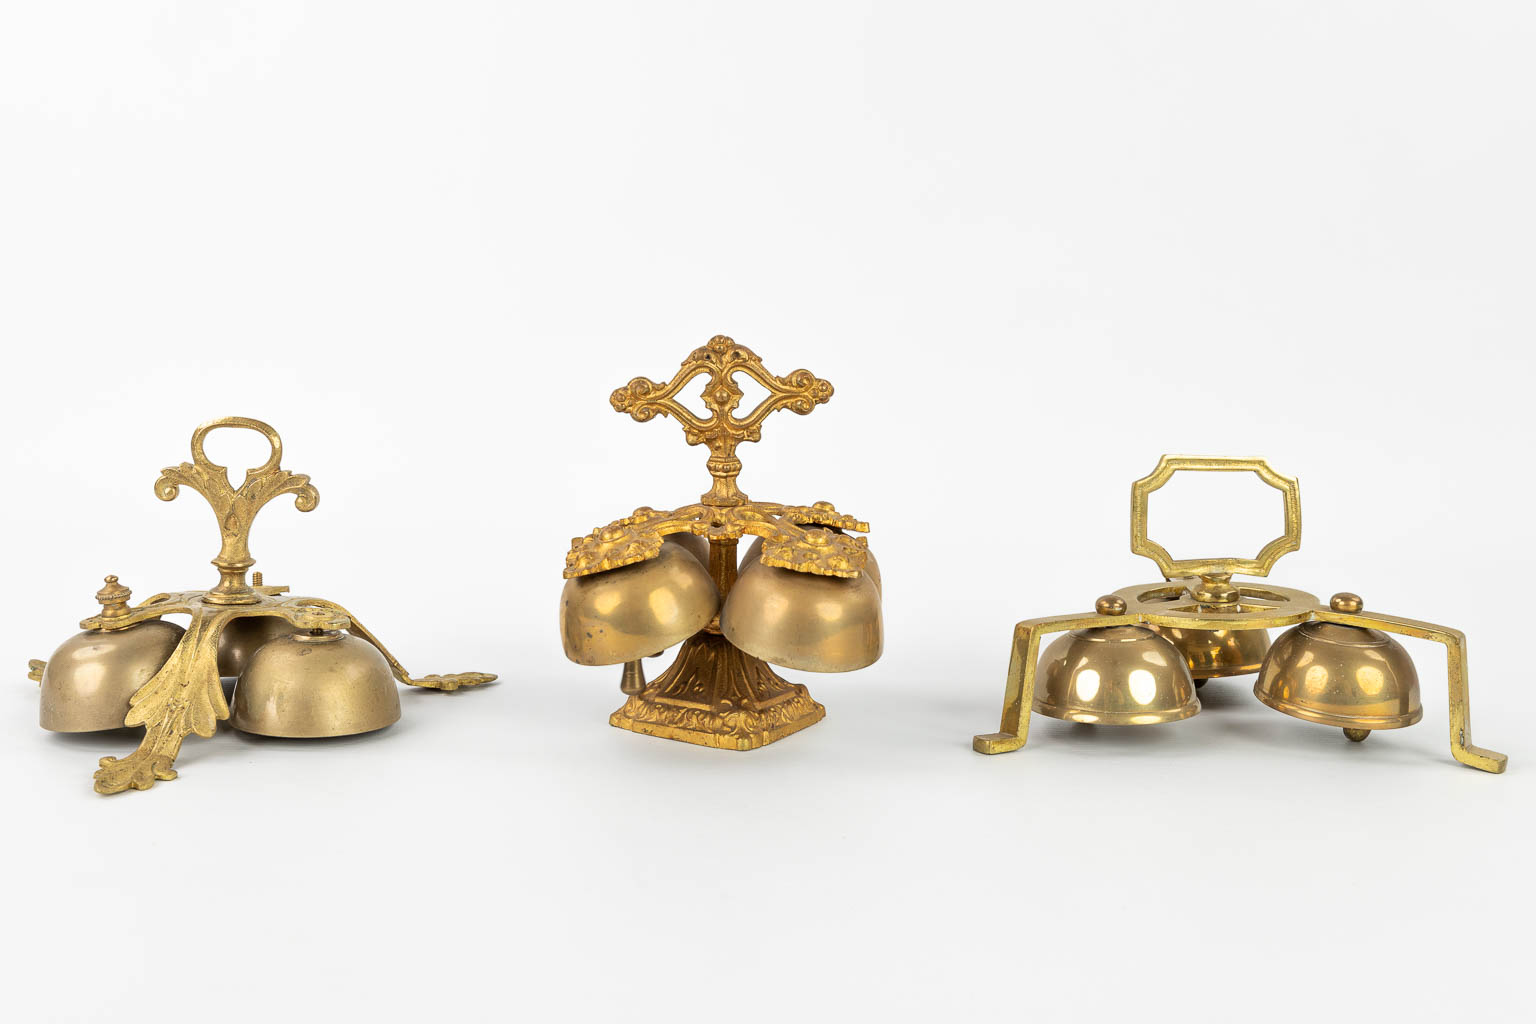 An assembled collection of 5 Altar Bells, made of various metal types. (H:15cm) - Image 3 of 8